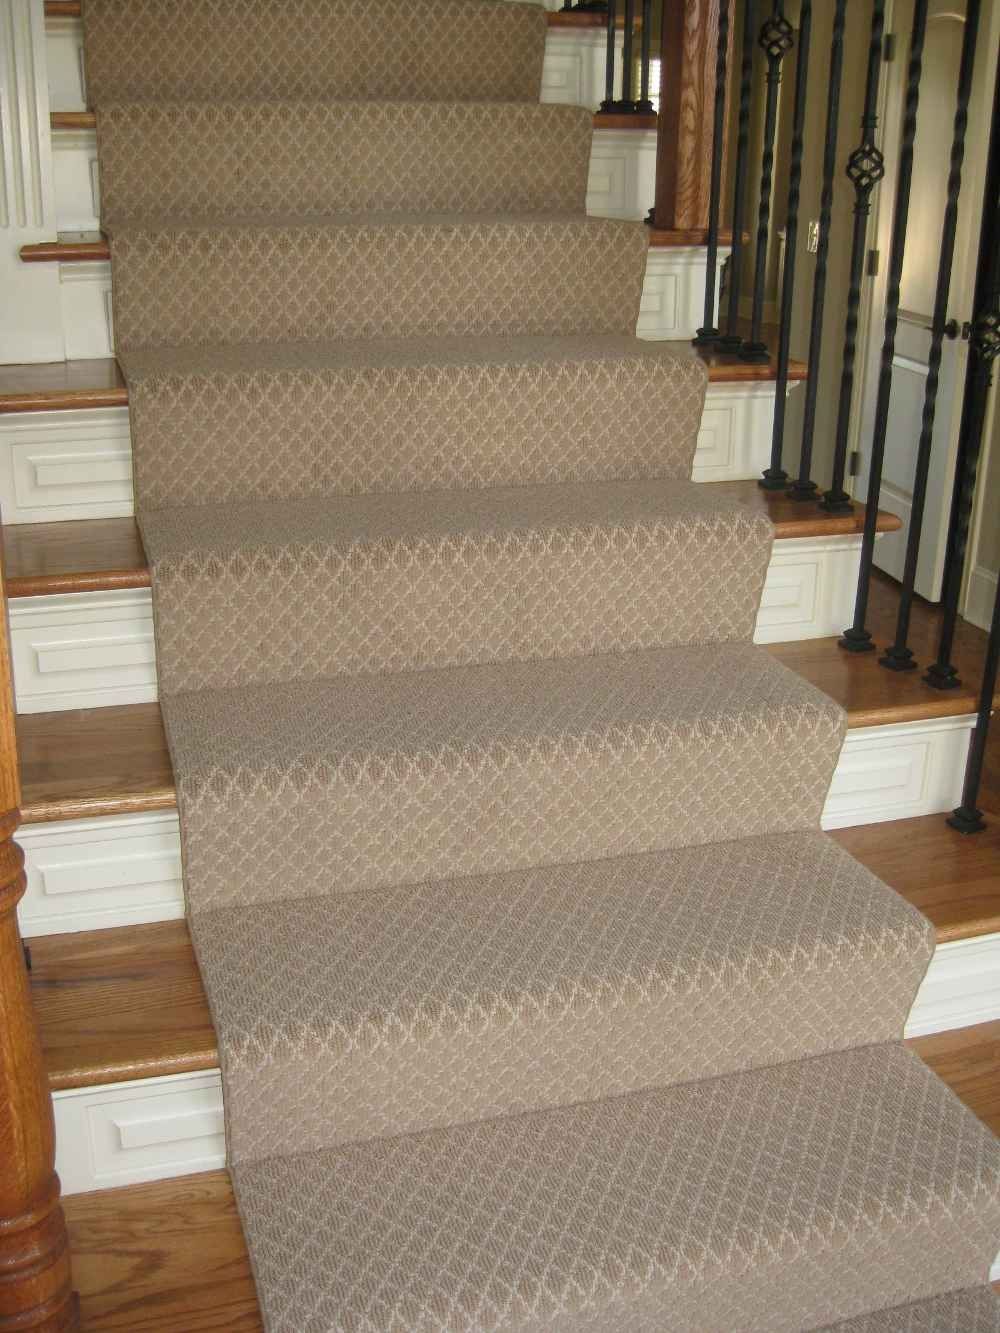 Keep Plastic Carpet Runners For Stairs Interior Home Design Within Stair Tread Carpet Runners (Photo 15 of 20)